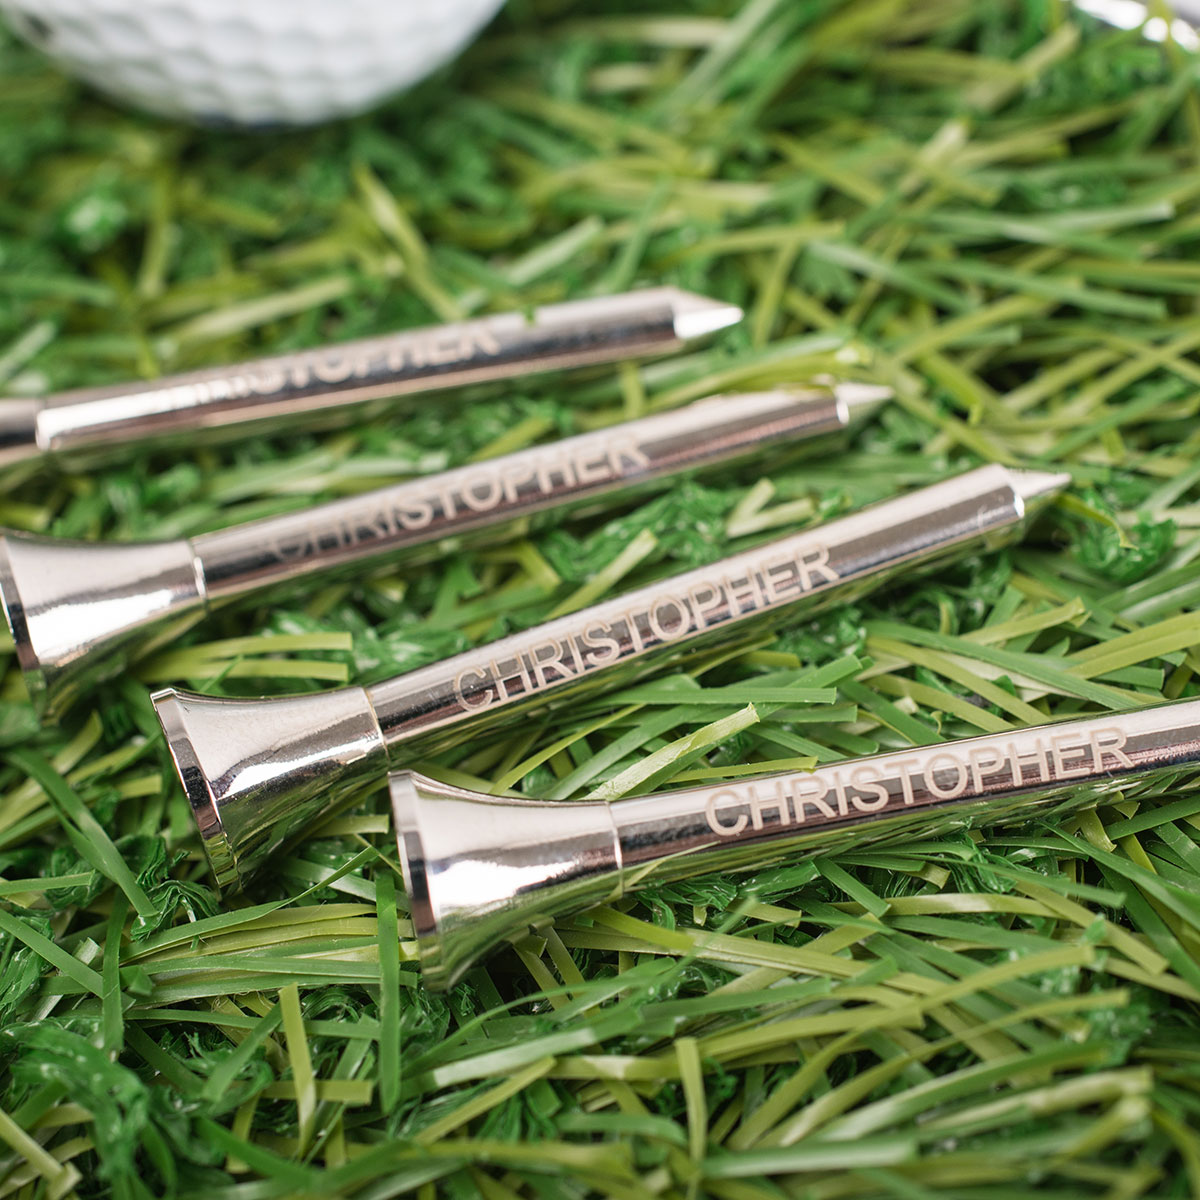 Buy Personalised Engraved Golf Tees for GBP 14.99 | Card Factory UK